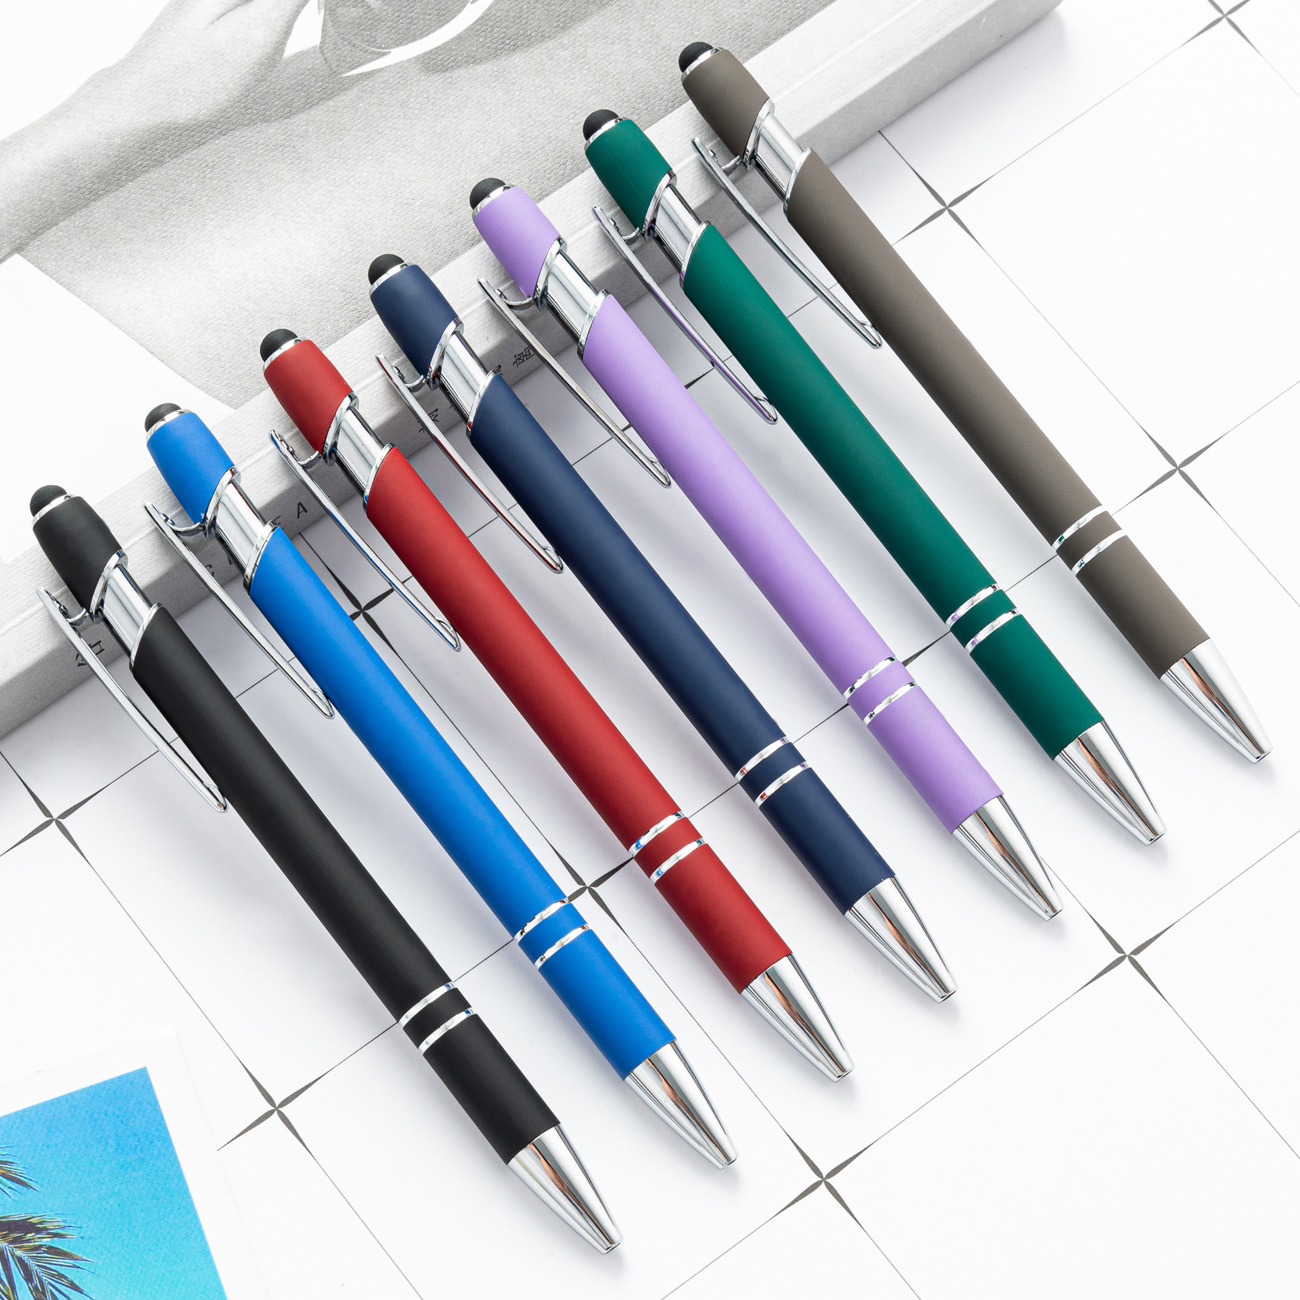 Metal Aluminum Shell pen Touch Screen Writing from $1.09